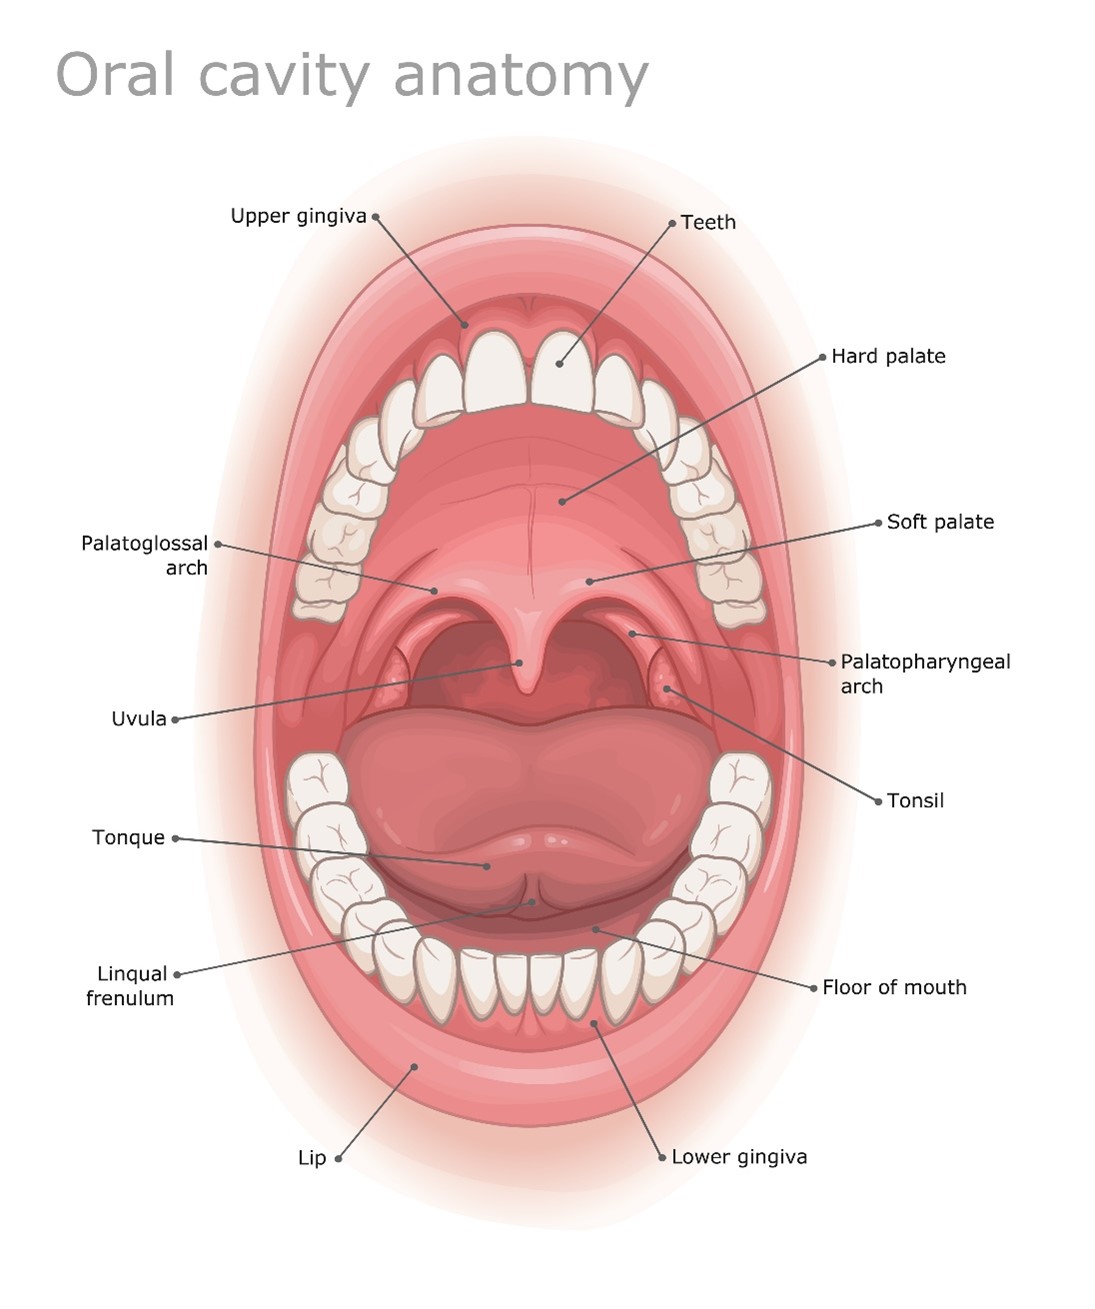 Anatomy of the oral cavity.